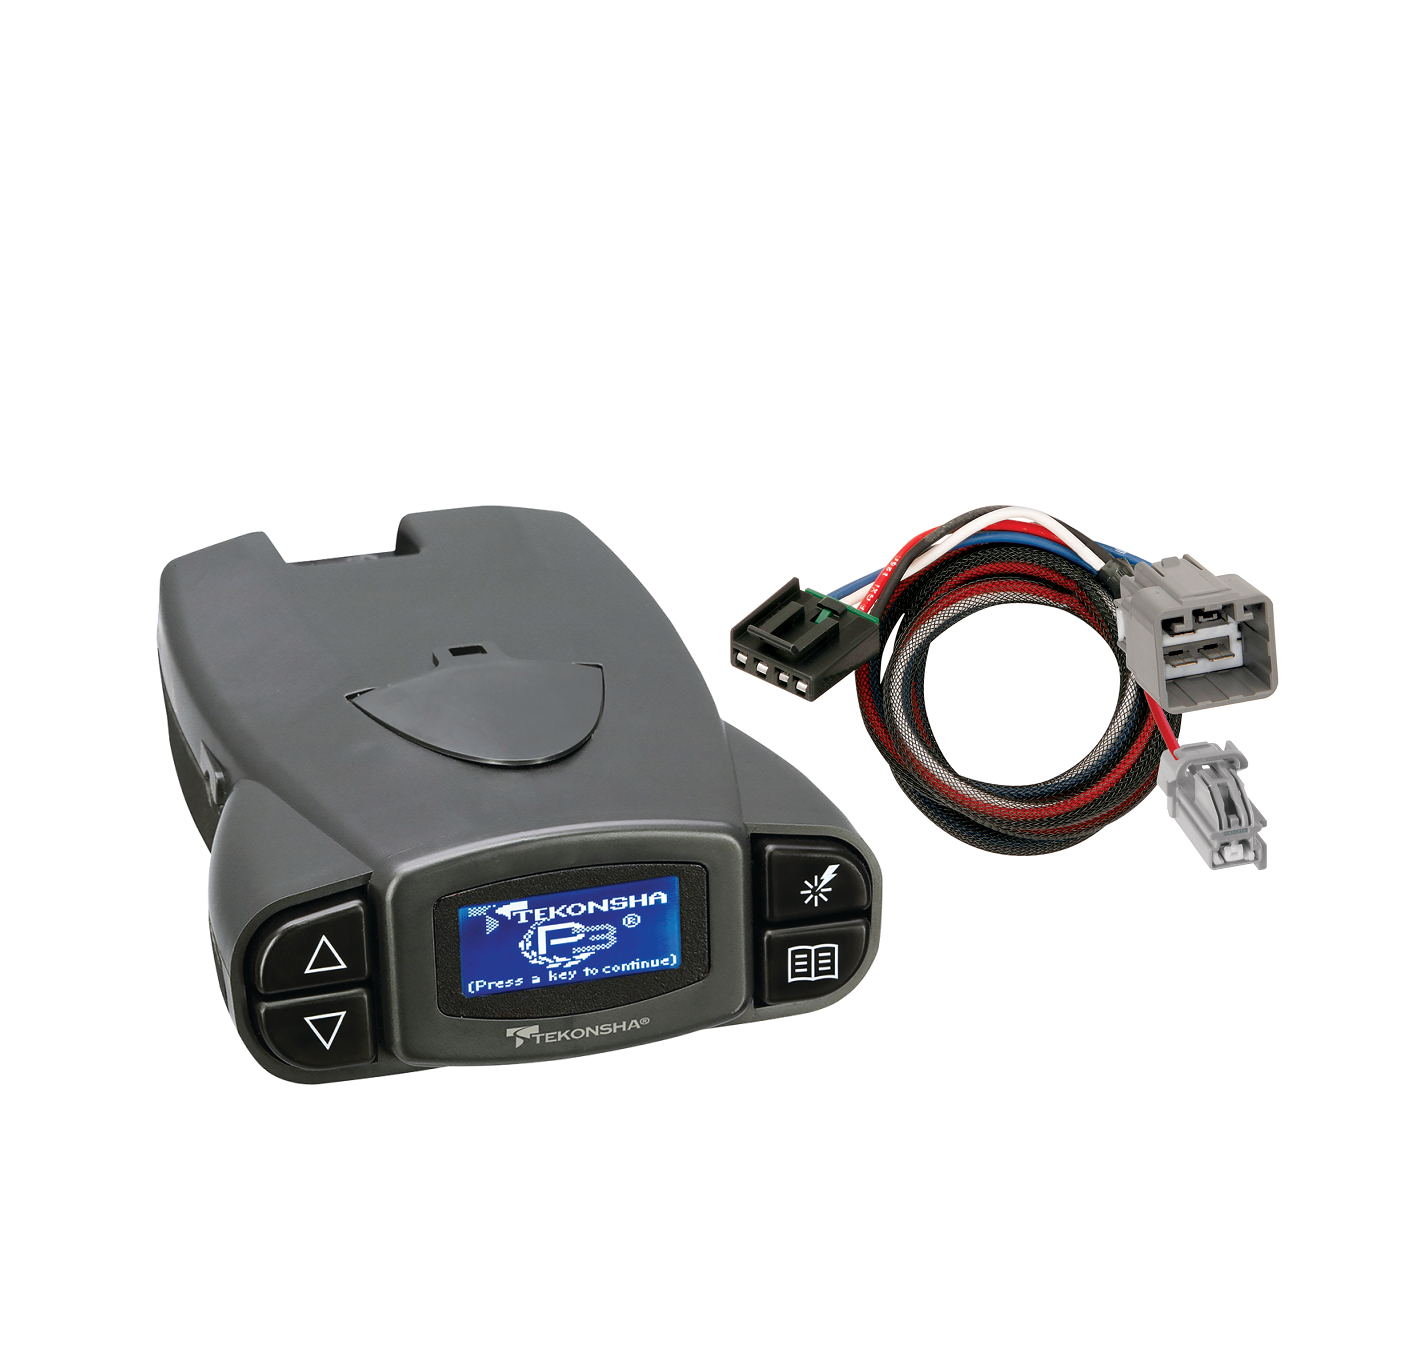 2013-2014 RAM 1500 3023 Tekonsha Prodigy P3 Proportional Brake Controller for Trailers with 1-4 Axles 90195 w/ Plug-N-Play Wire